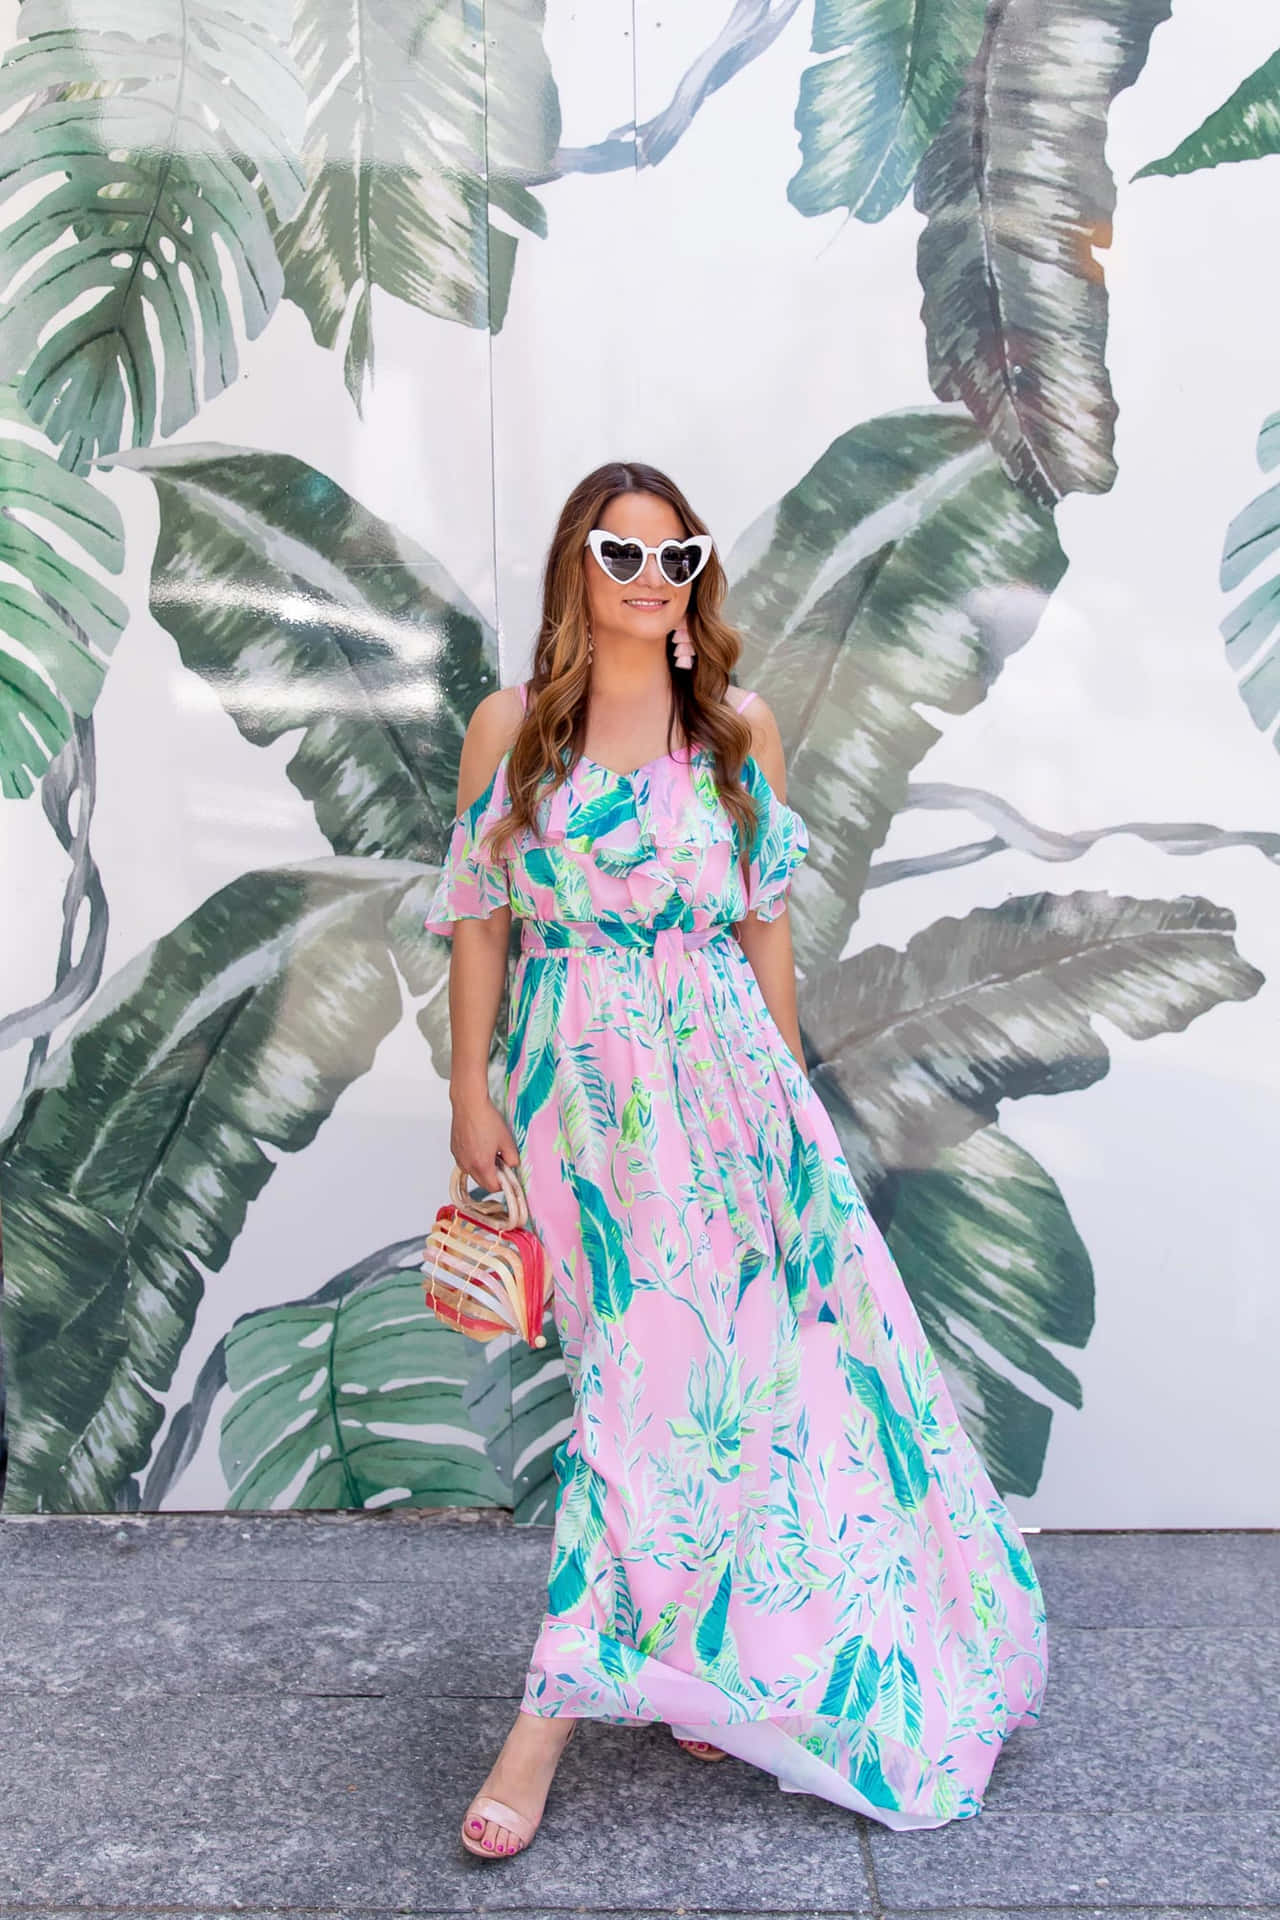 Elevate your style with Lilly Pulitzer's iconic looks!